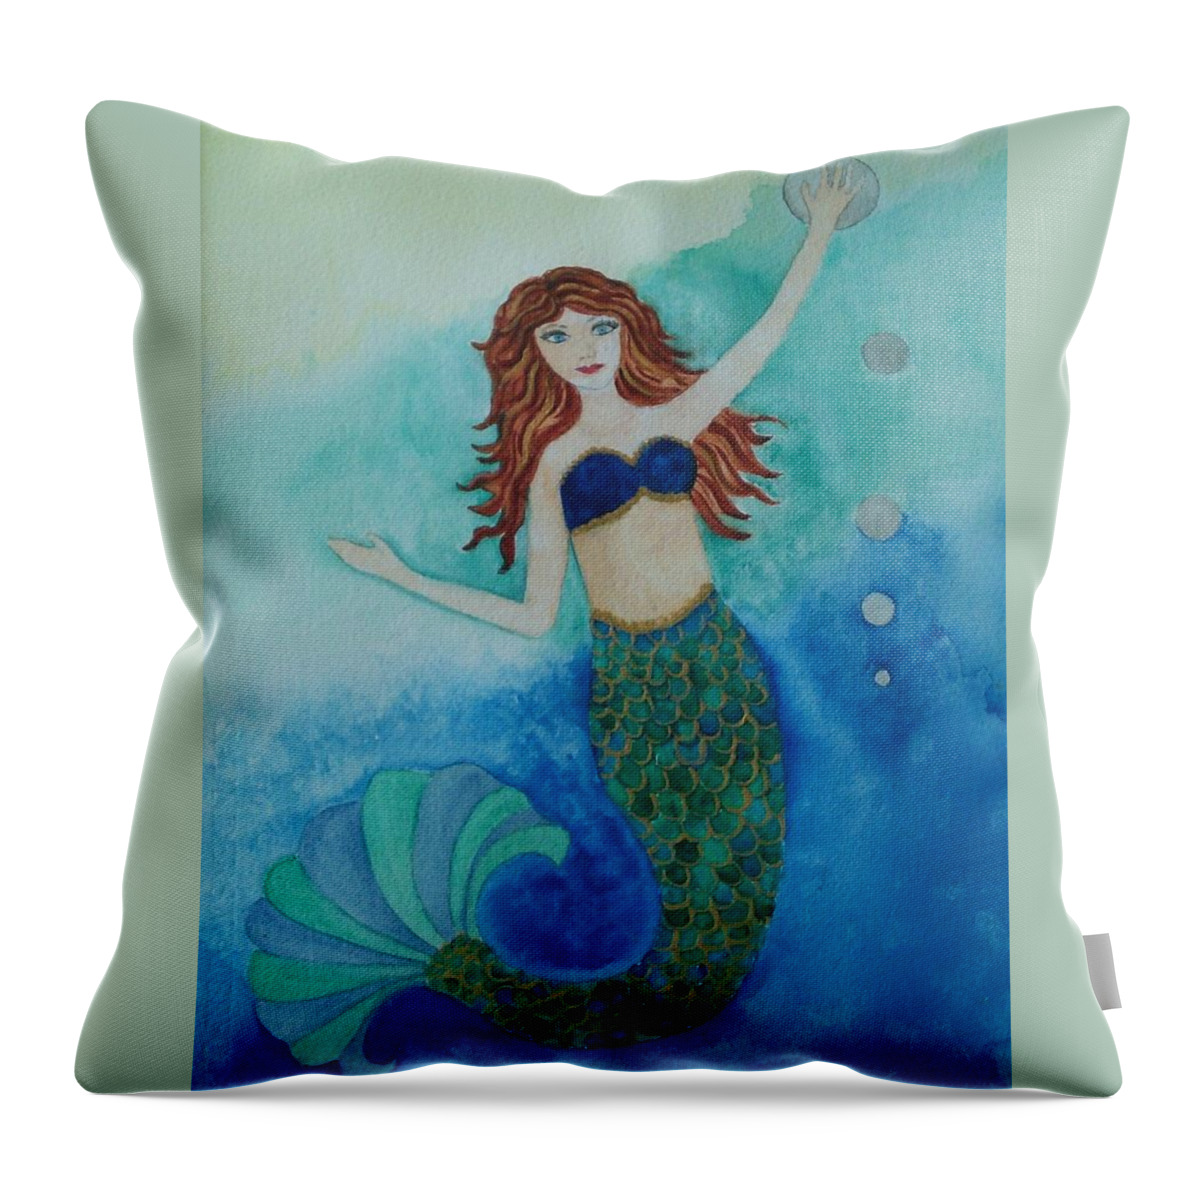 Mermaid Throw Pillow featuring the painting Mermaid And Bubbles by Susan Nielsen